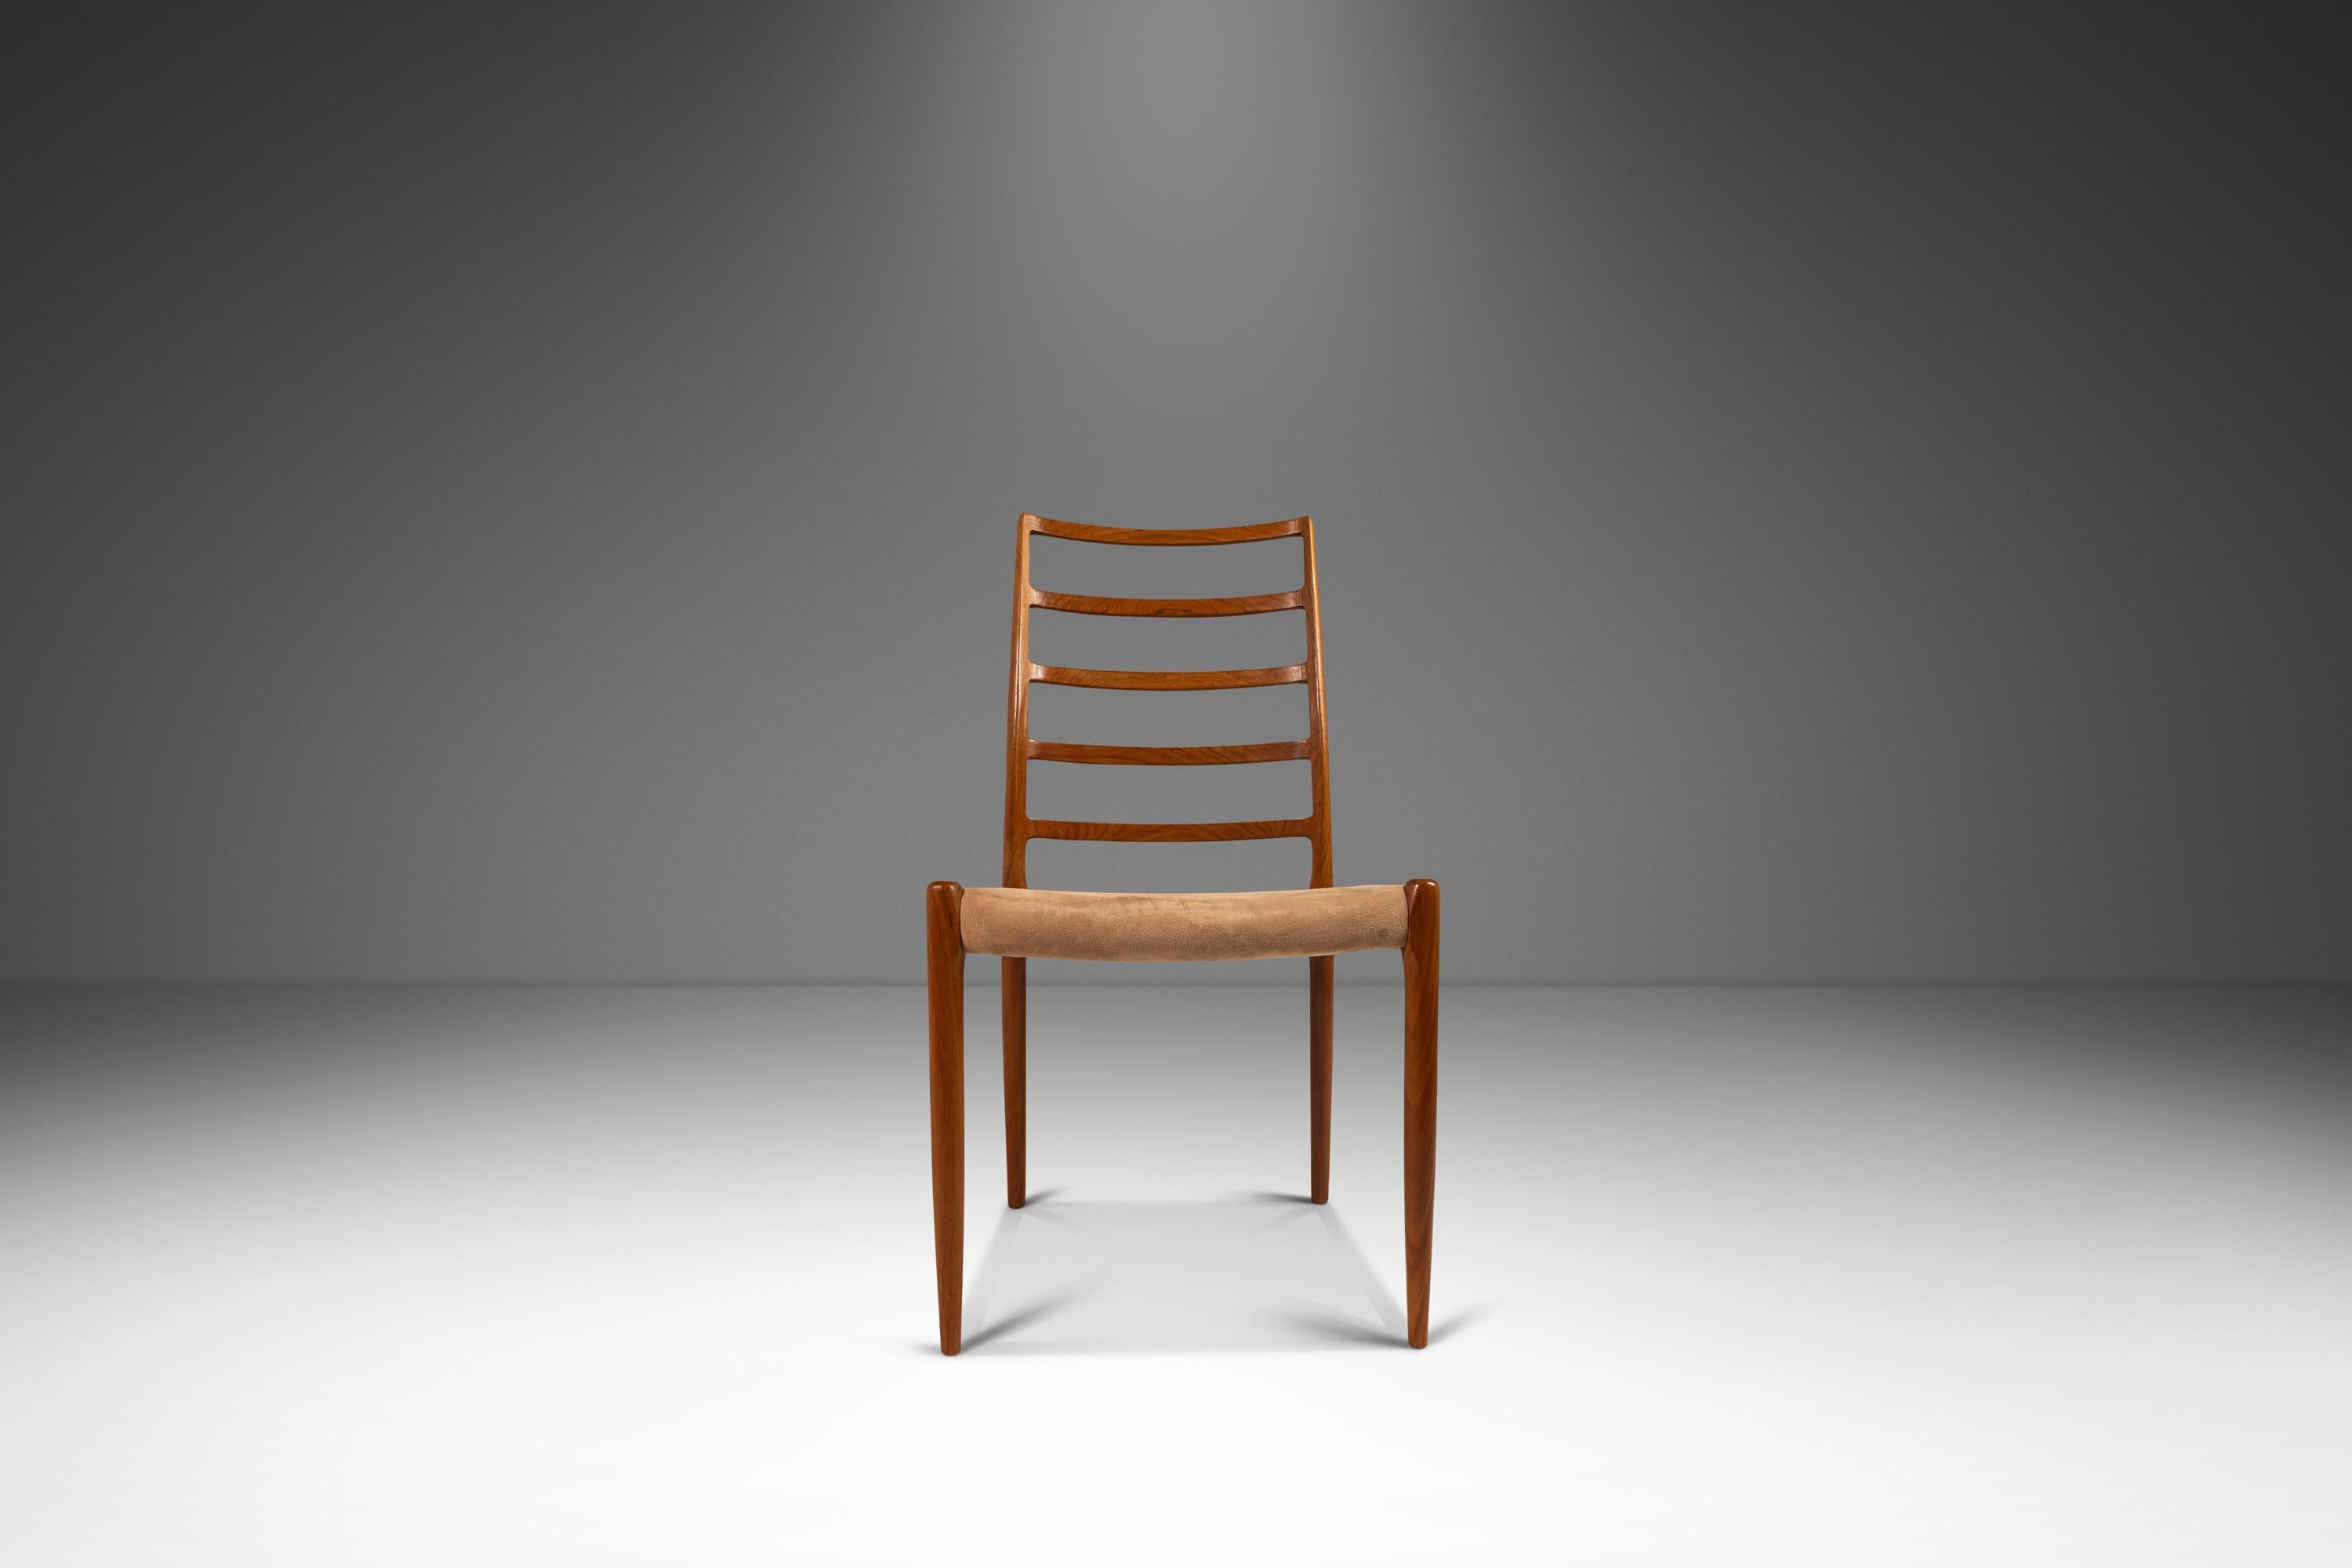 Introducing a rare and limited set of four (4) Model 82 ladderback dining chairs designed by Niels Møller for J.L. Møllers Møbelfabrik, crafted in the 1970s in Denmark. These stunning chairs are constructed from solid teak, showcasing the natural